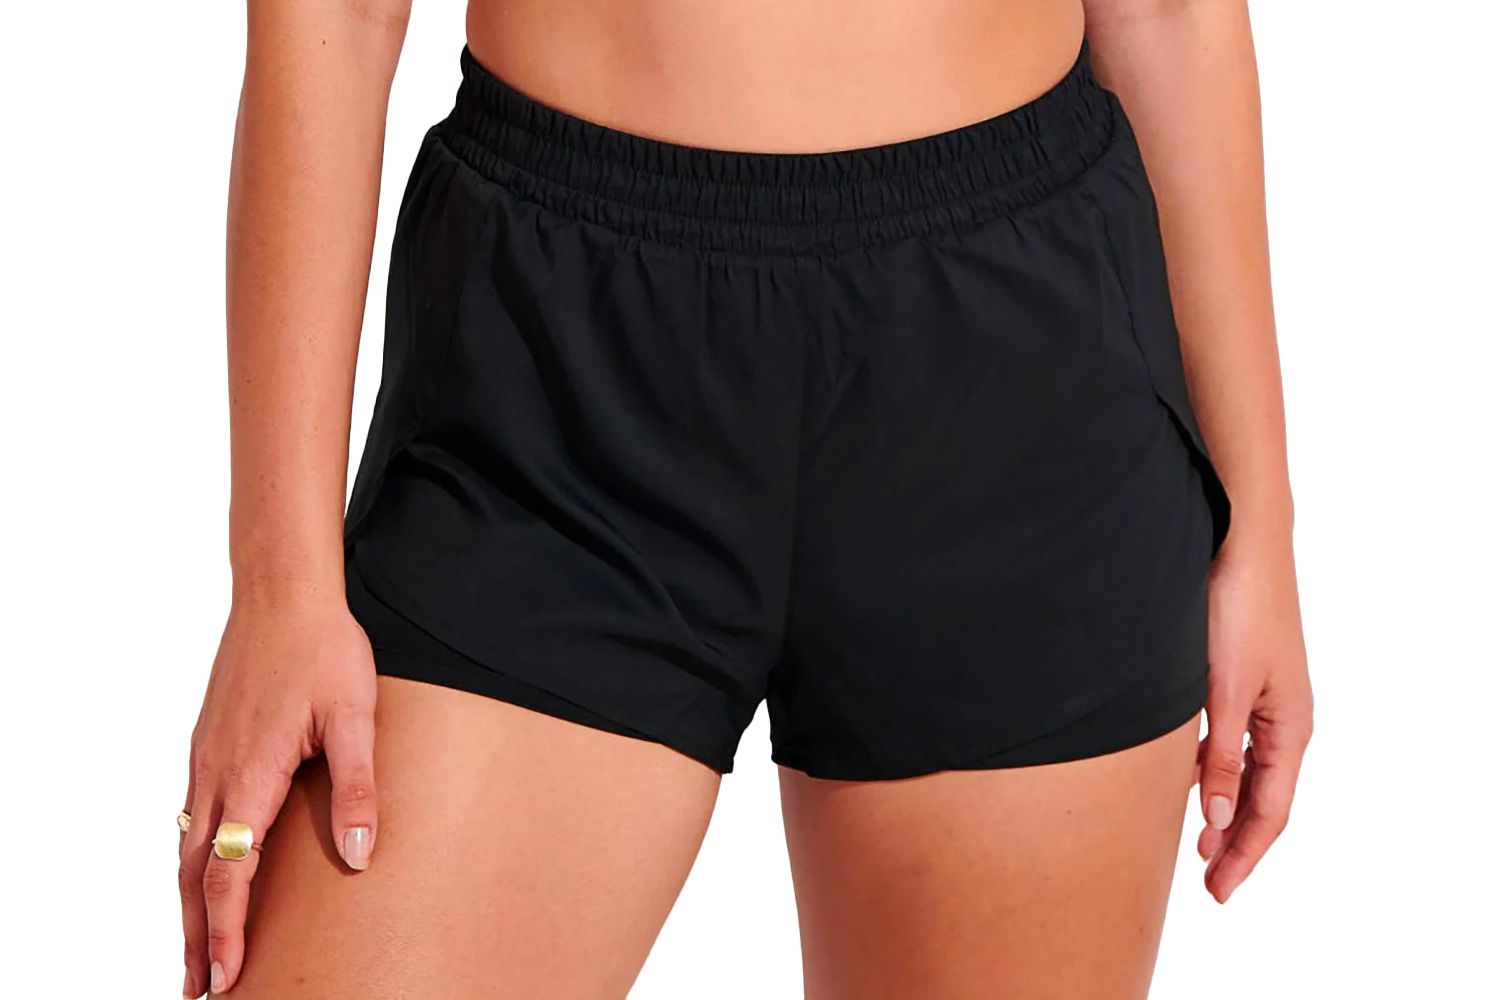 11 Incredible Women’s Fitness Shorts For 2023